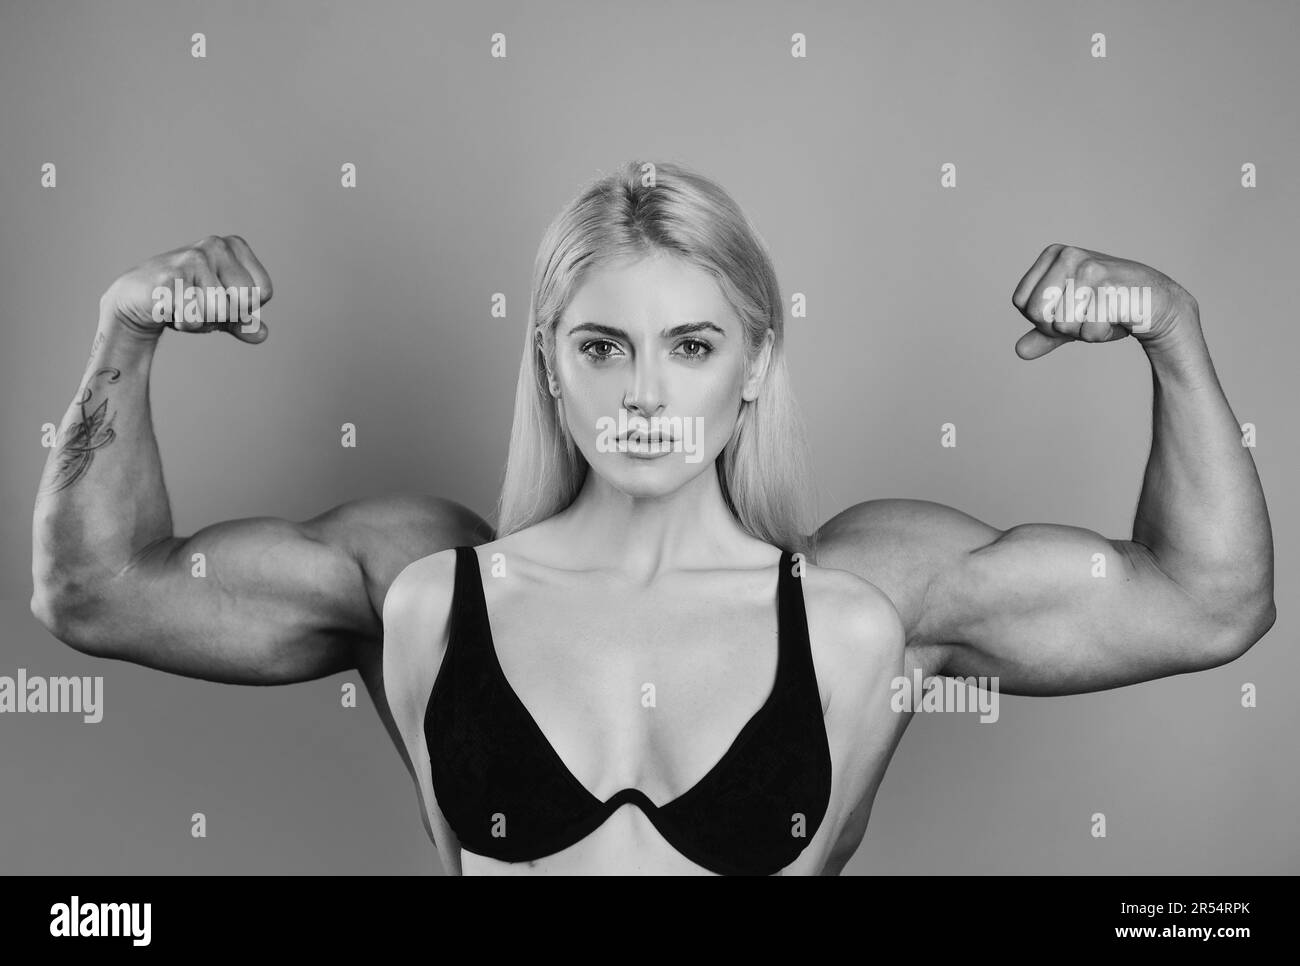 Girl shows her muscles strength Black and White Stock Photos